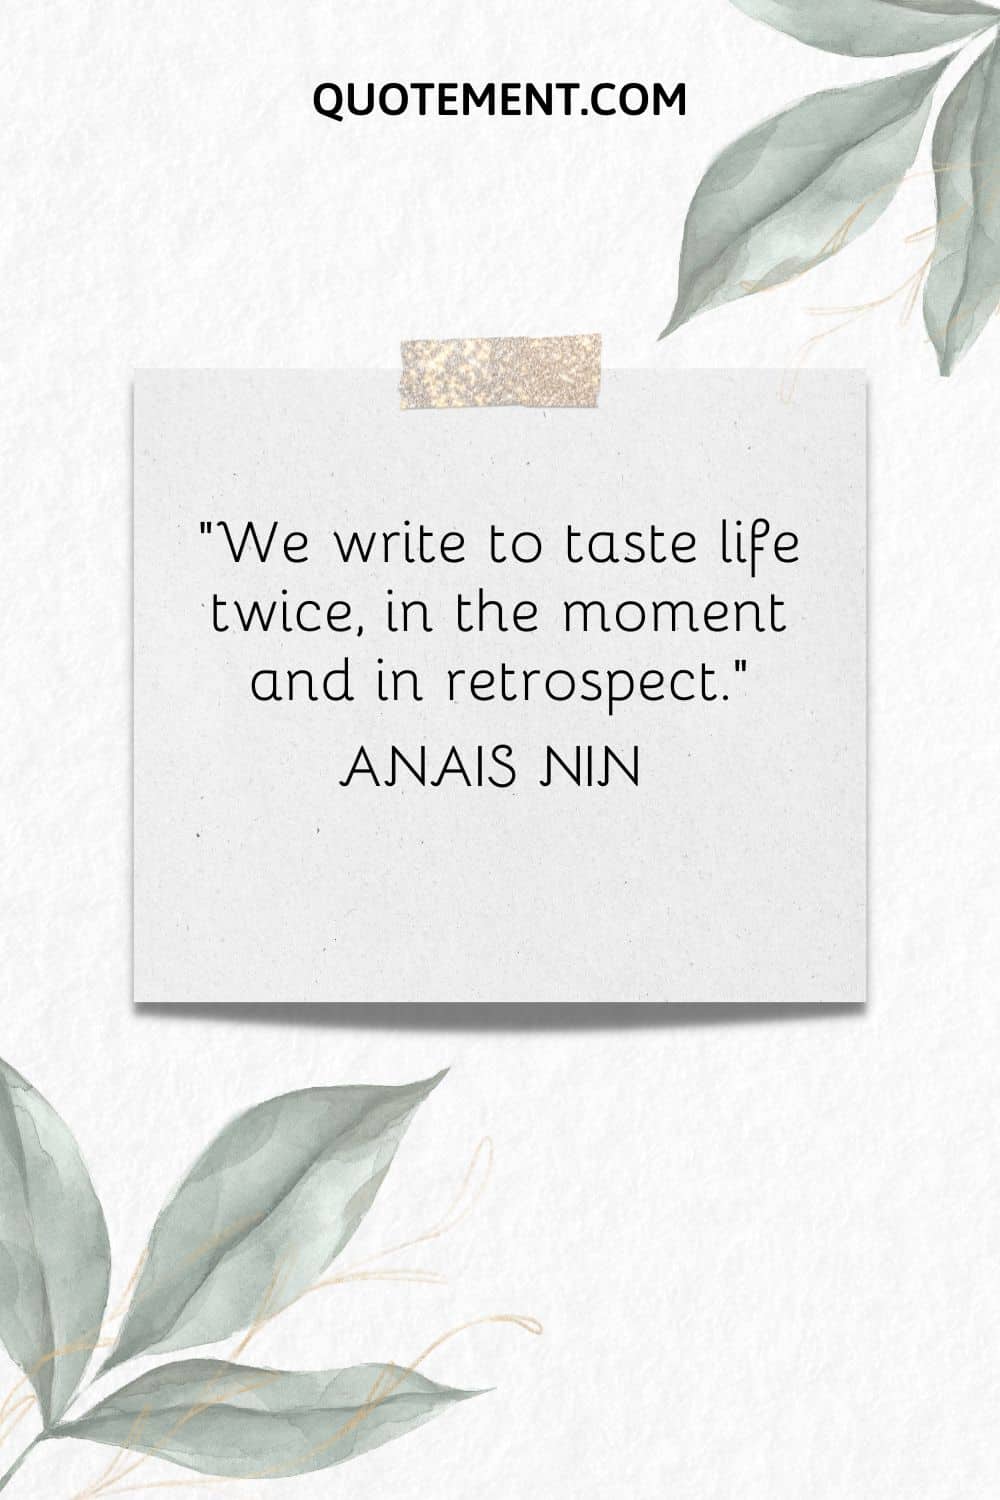 “We write to taste life twice, in the moment and in retrospect.” — Anais Nin